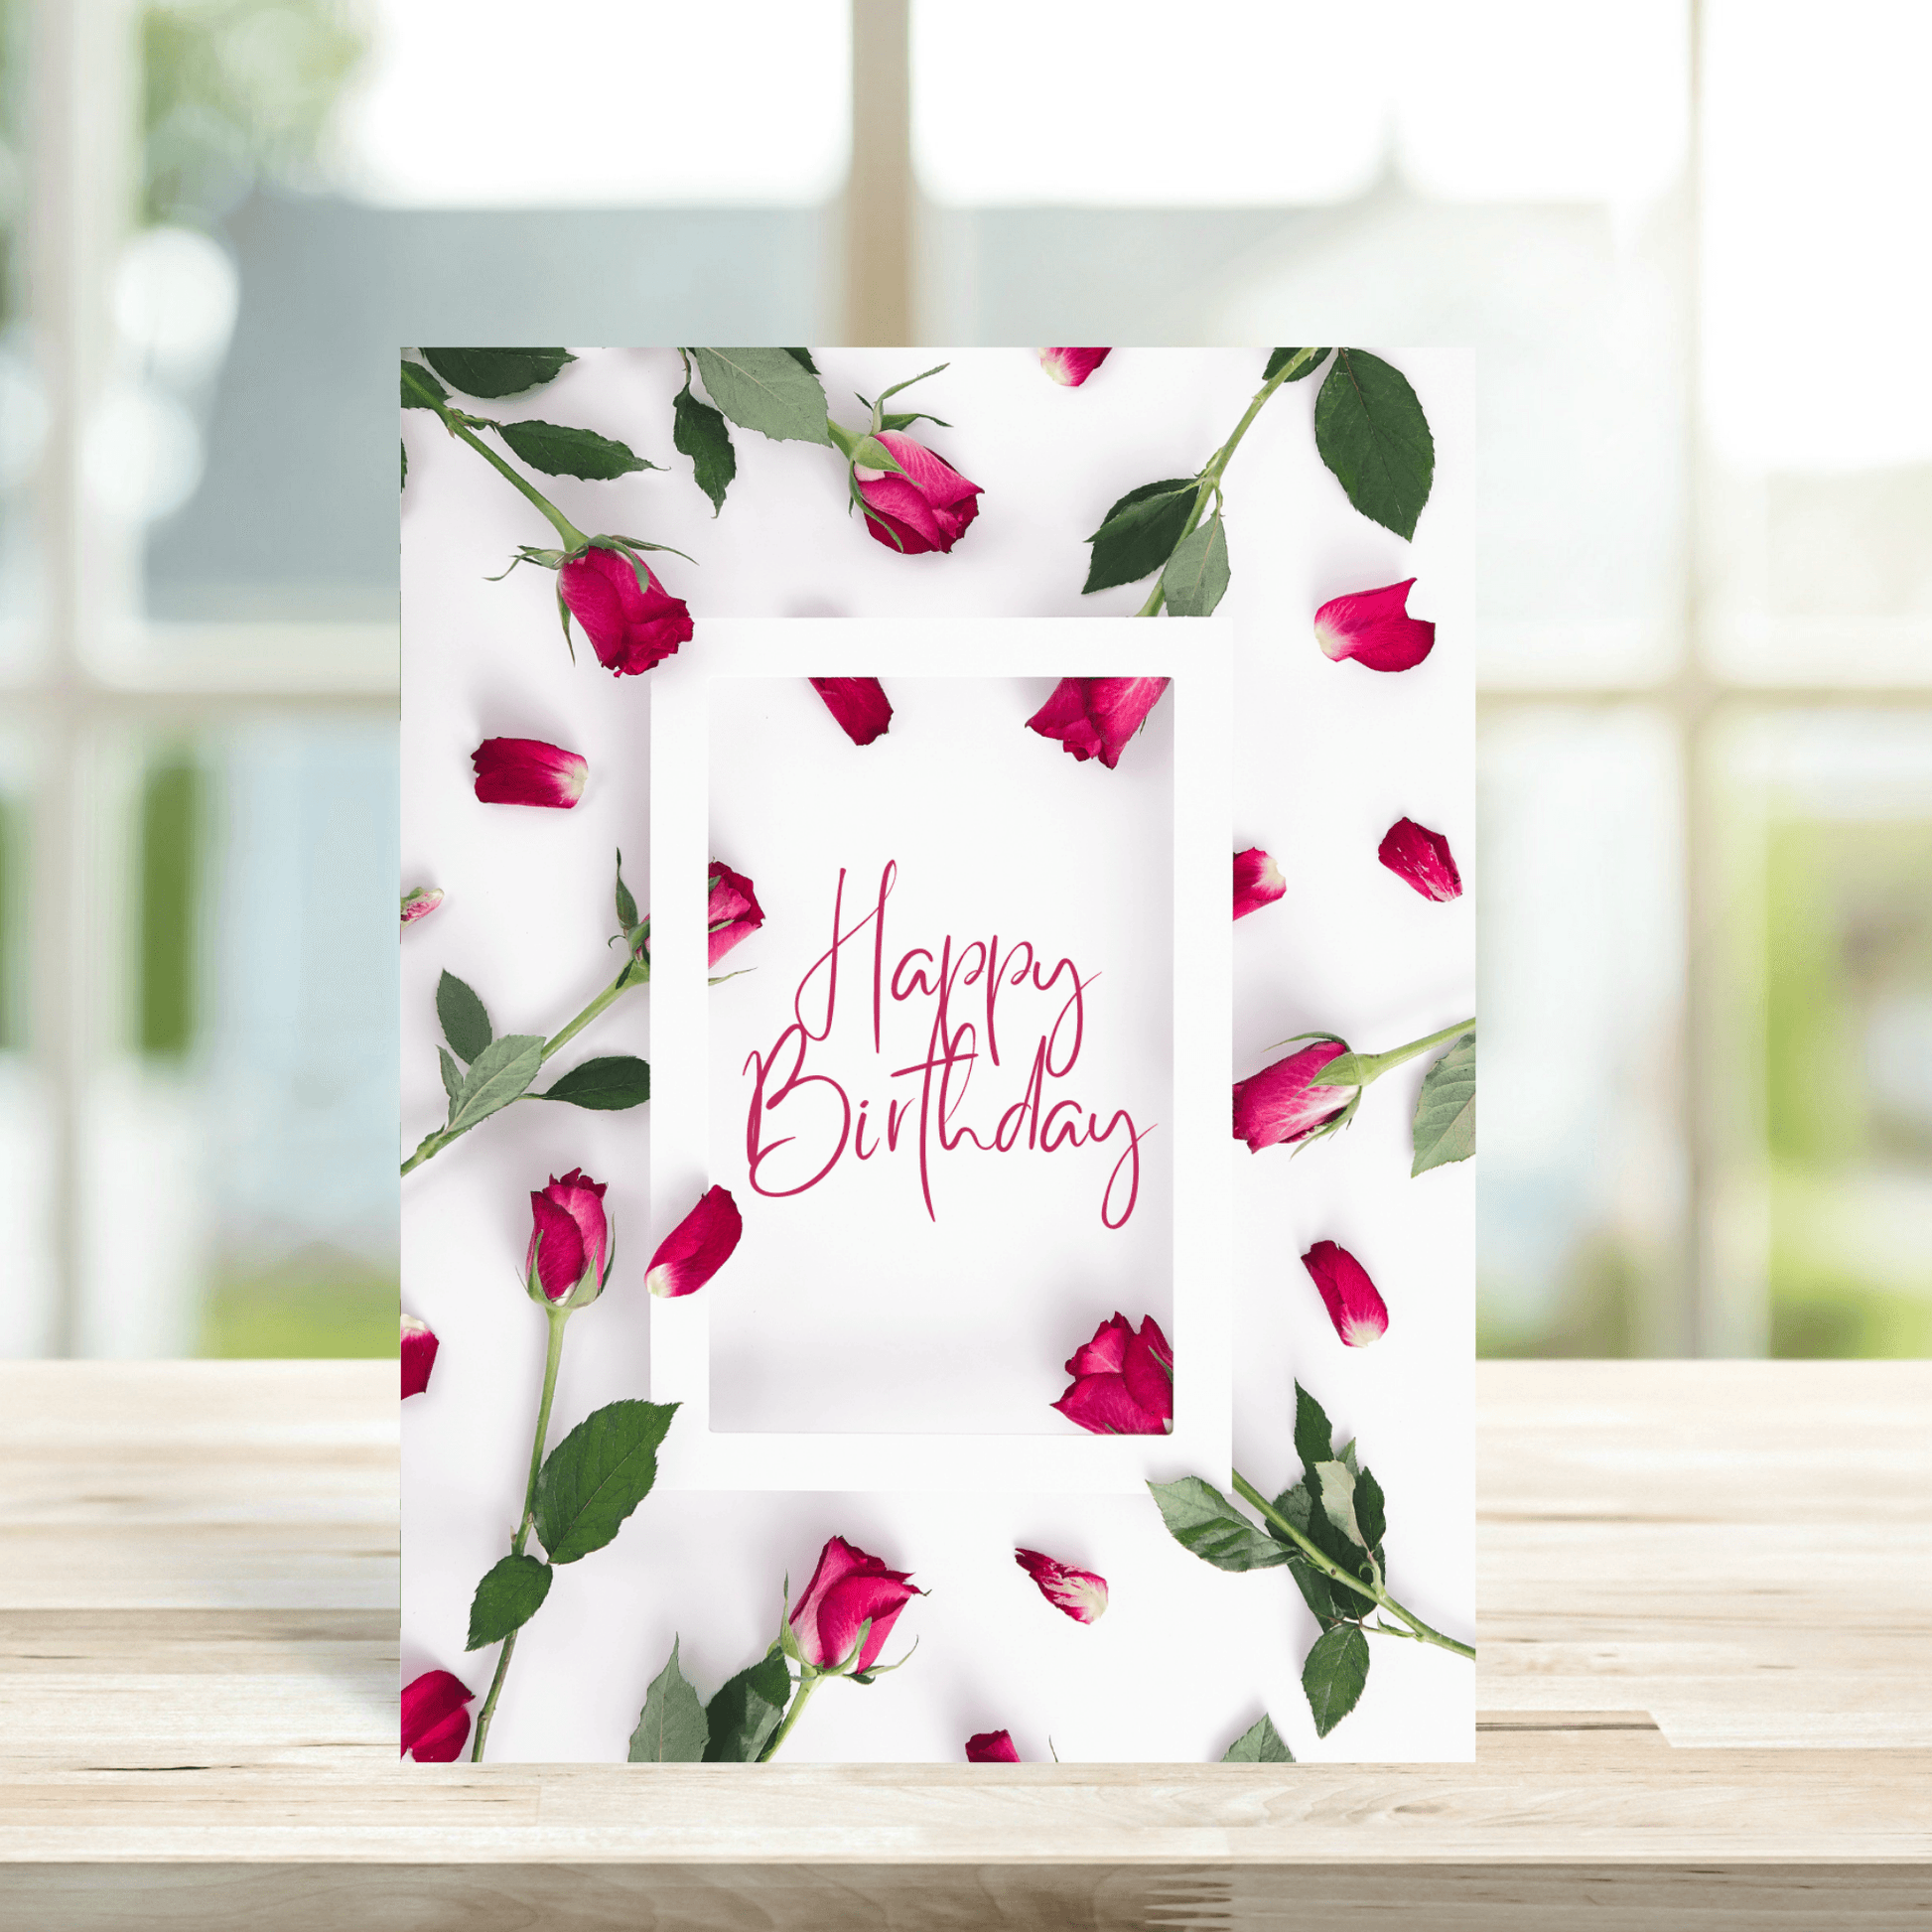 Scattered Roses Birthday Card - Peppy & Sage